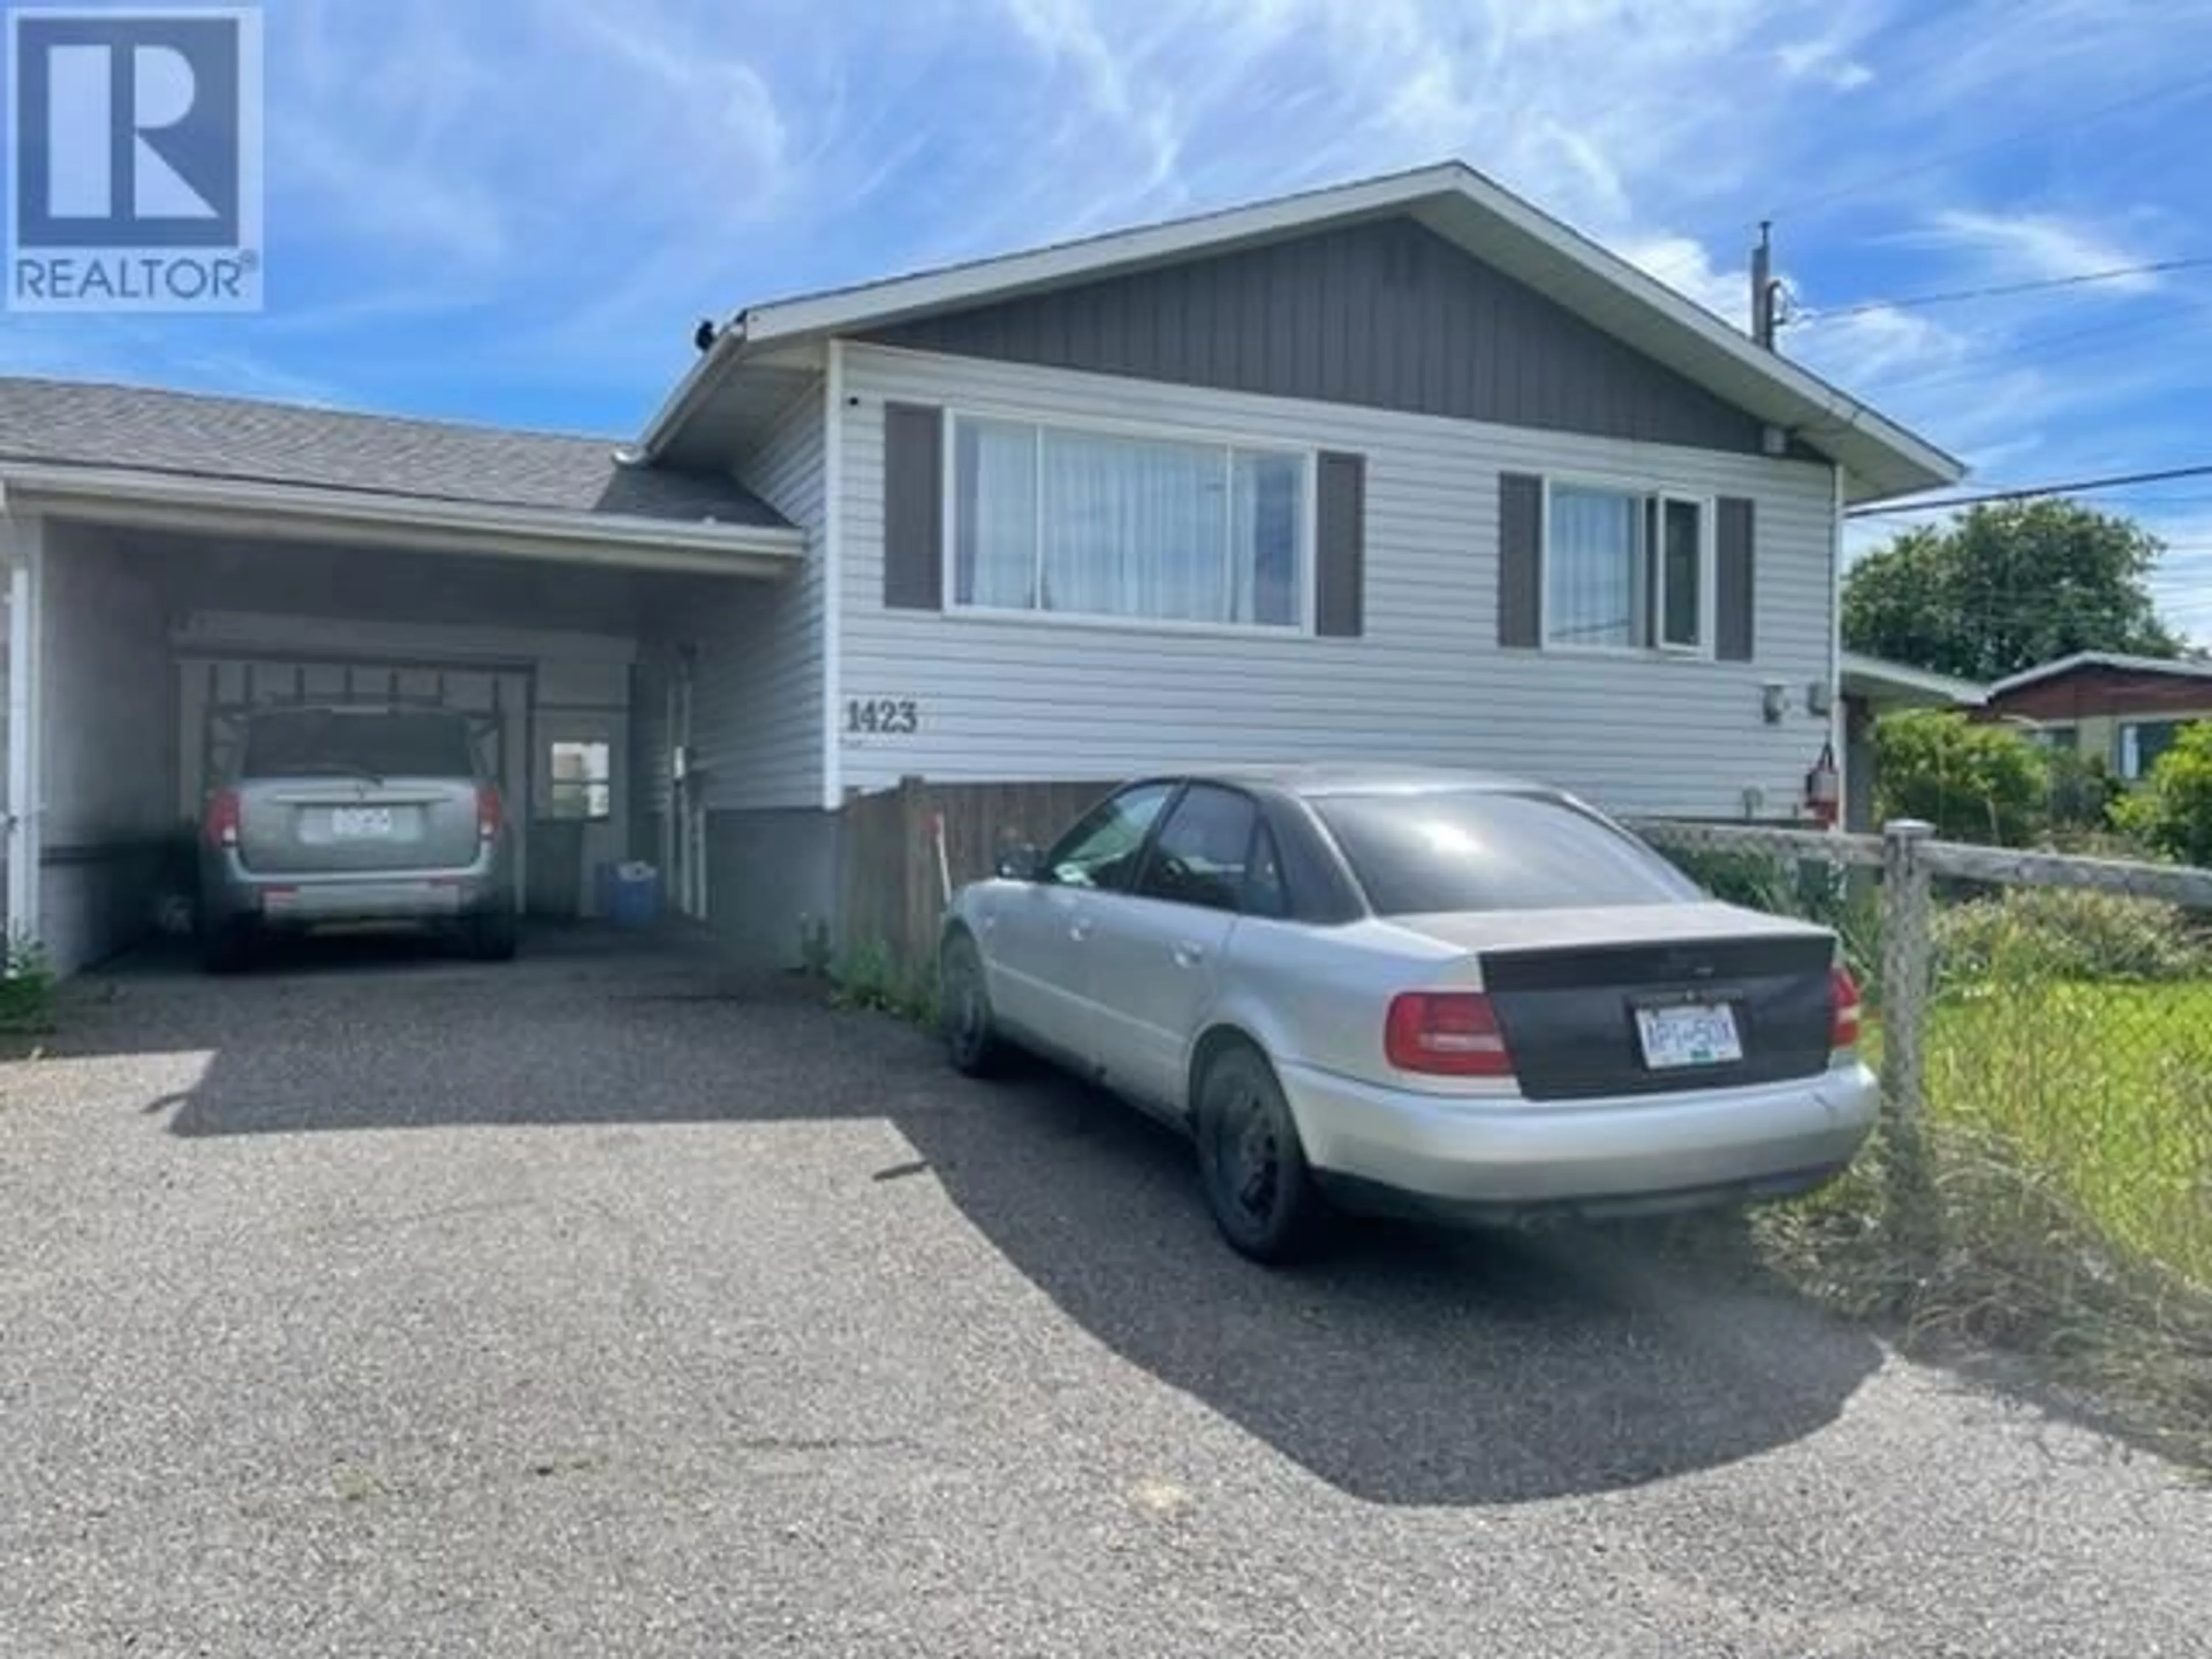 Frontside or backside of a home for 1423 STRATHCONA AVENUE, Prince George British Columbia V2L5C2